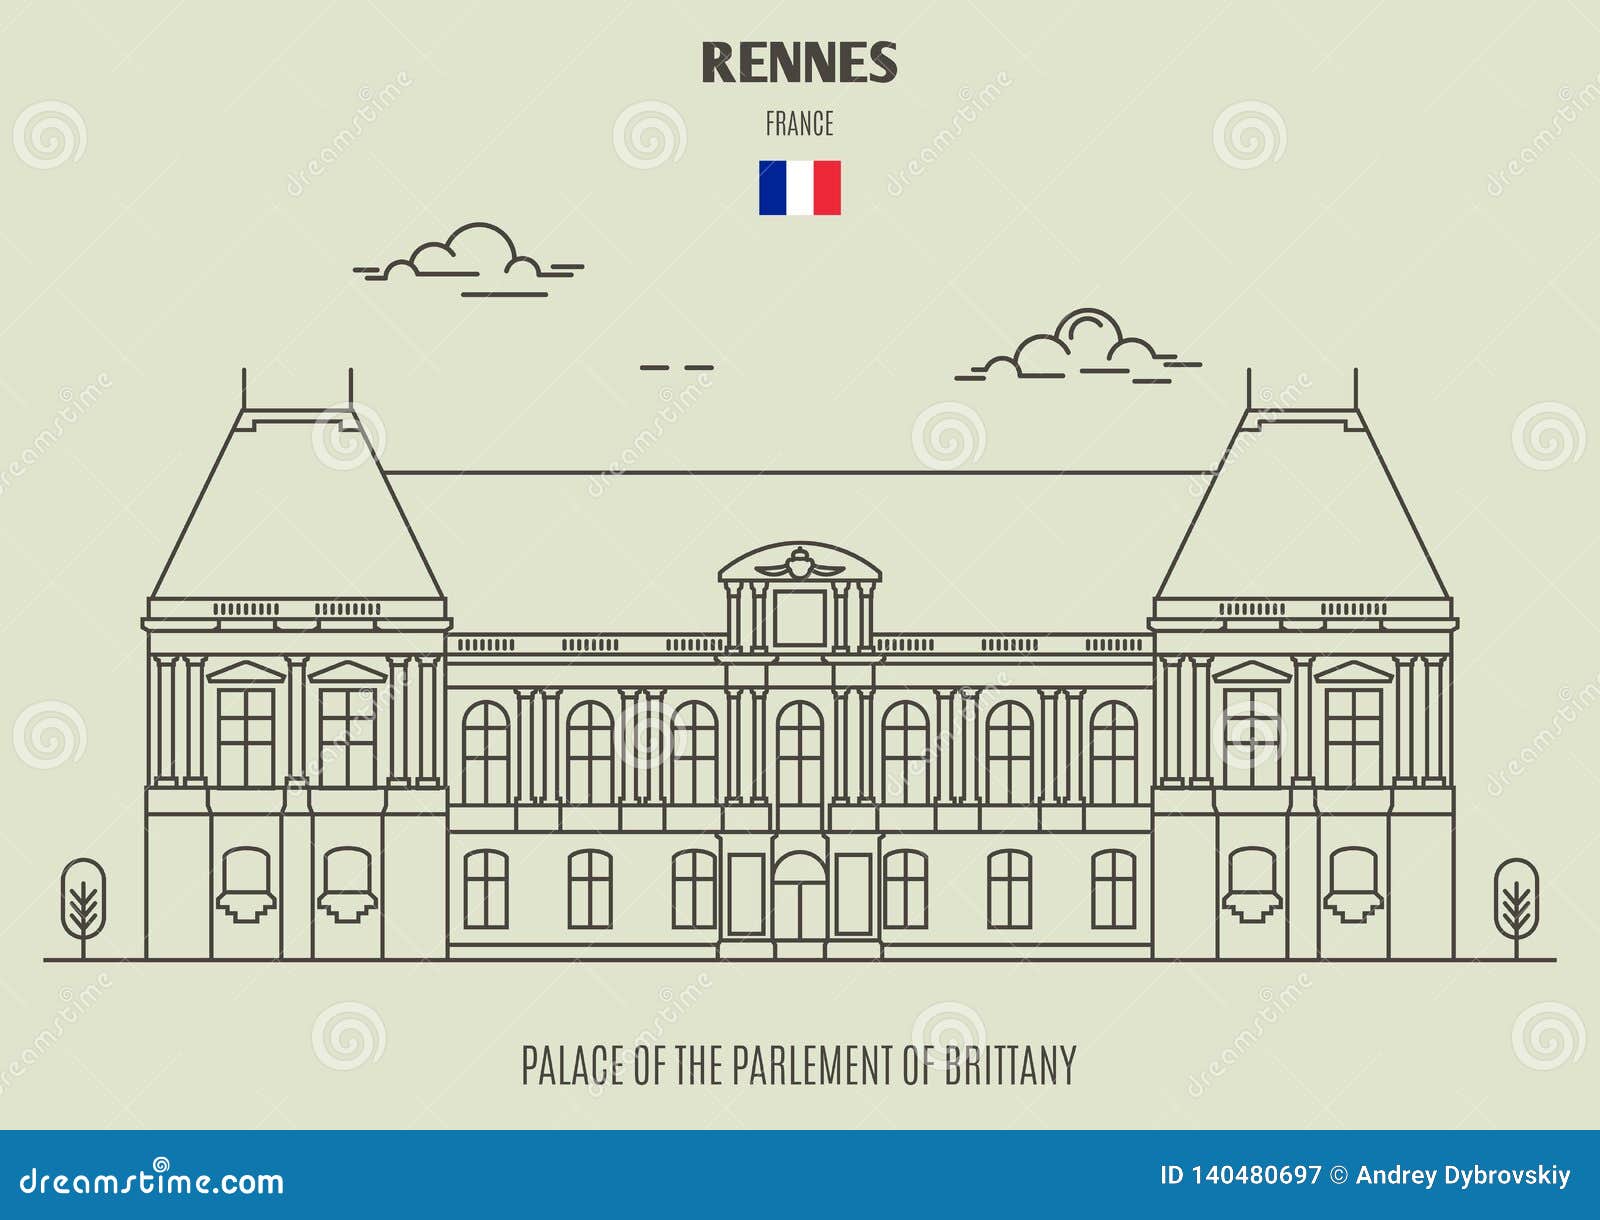 palace of the parlement of brittany in rennes, france. landmark icon